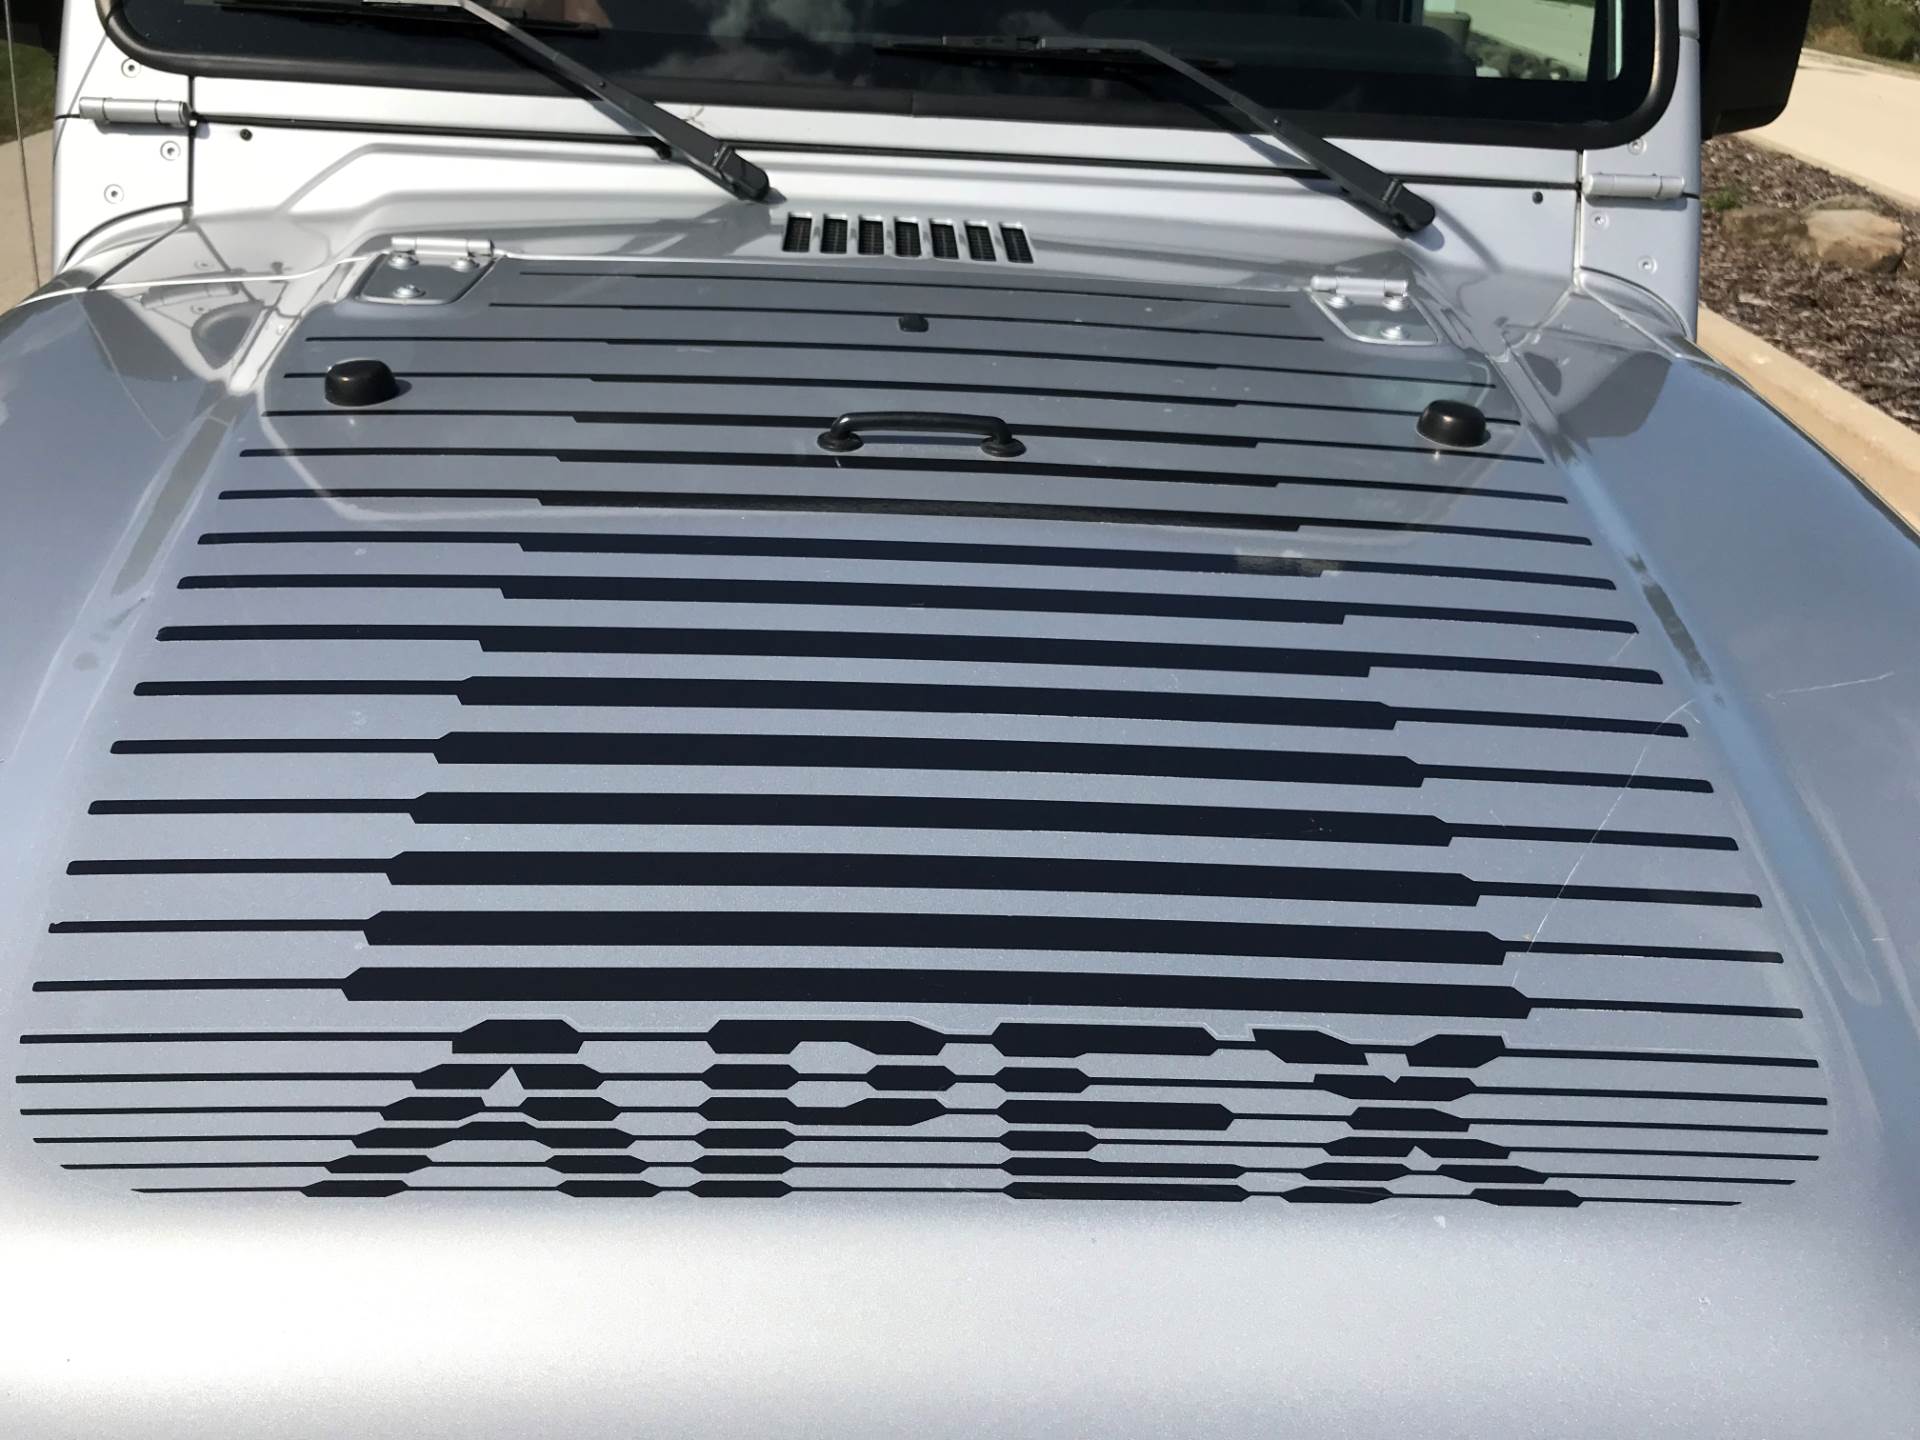 2002 Jeep Wrangler X Apex Edition 4WD 2dr SUV in Big Bend, Wisconsin - Photo 27